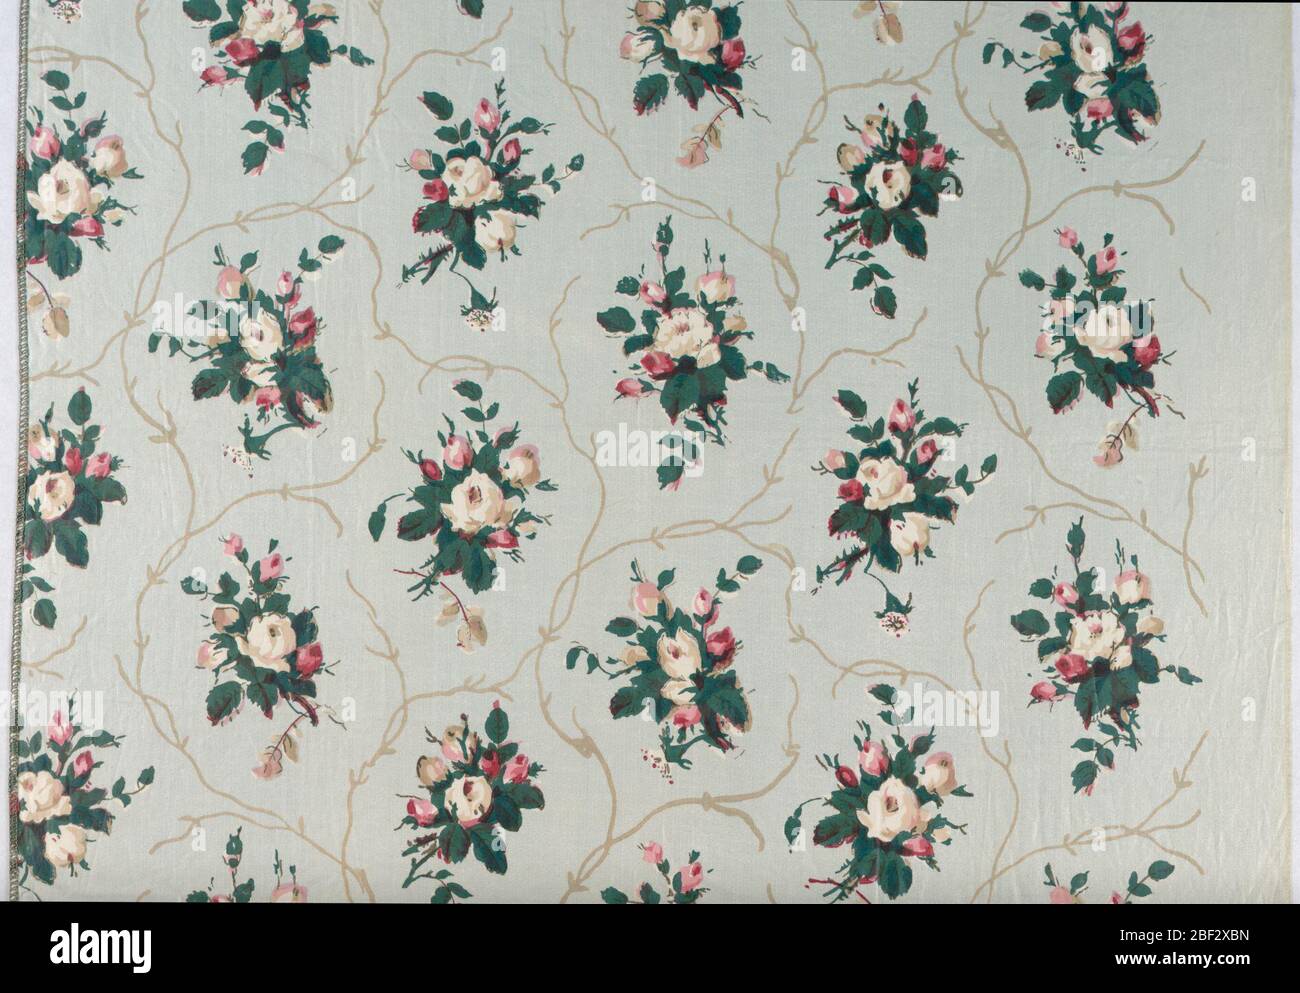 Textile. Allover design of floral sprays in red, green and tan on light blue background. Stock Photo